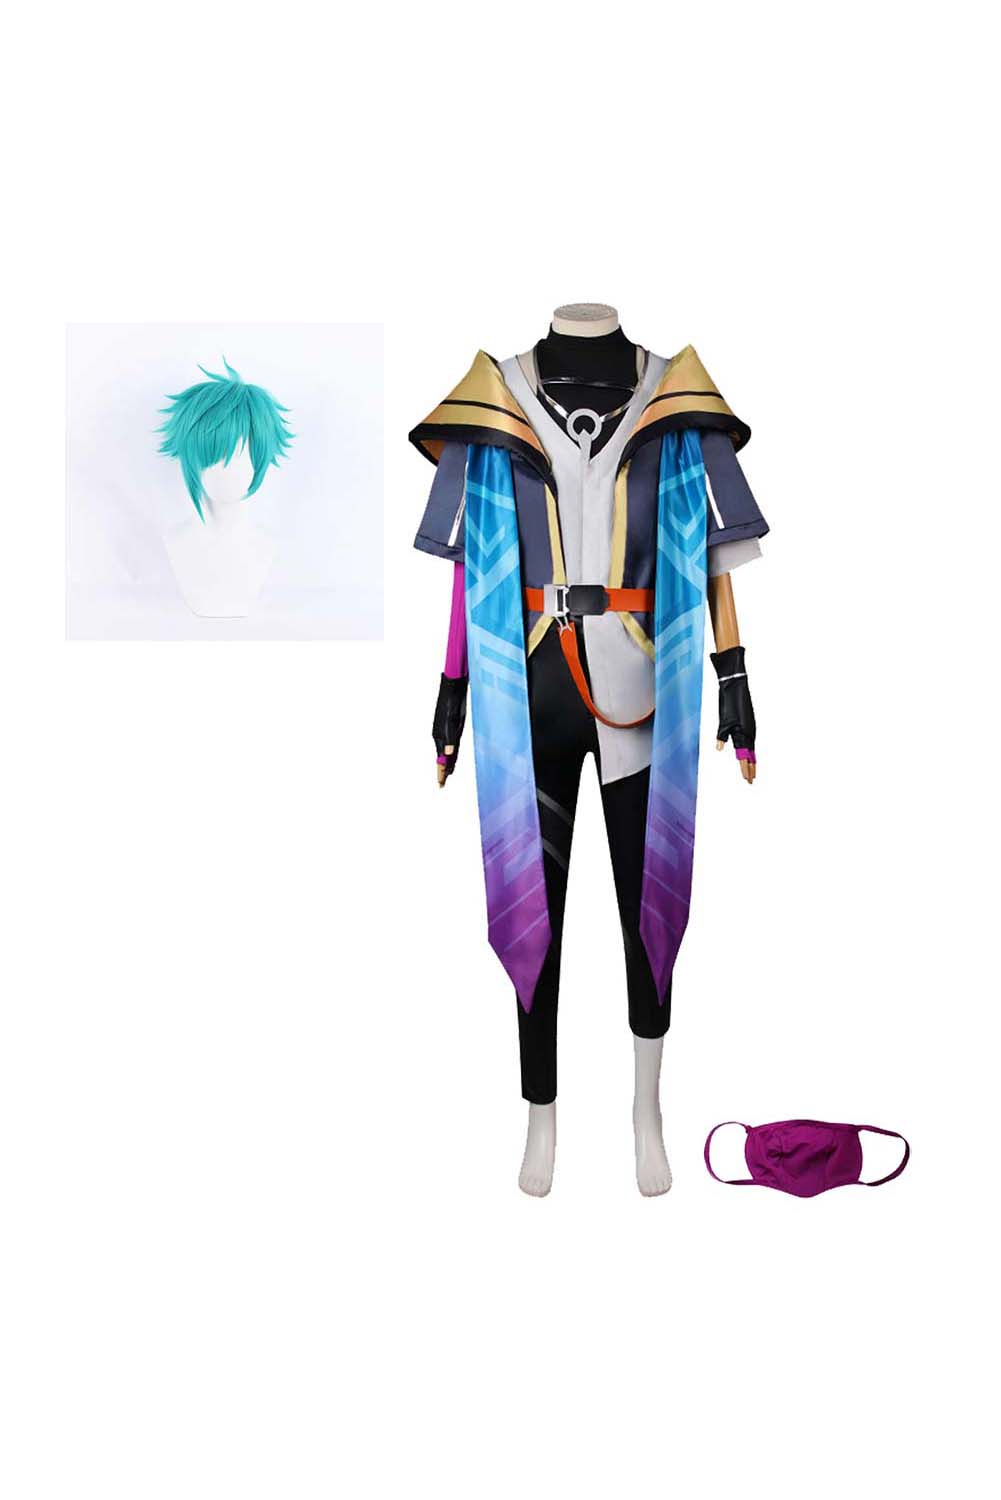 Game League of Legends Heartsteel Aphelios Outfits Halloween Carnival Suit Cosplay Costume